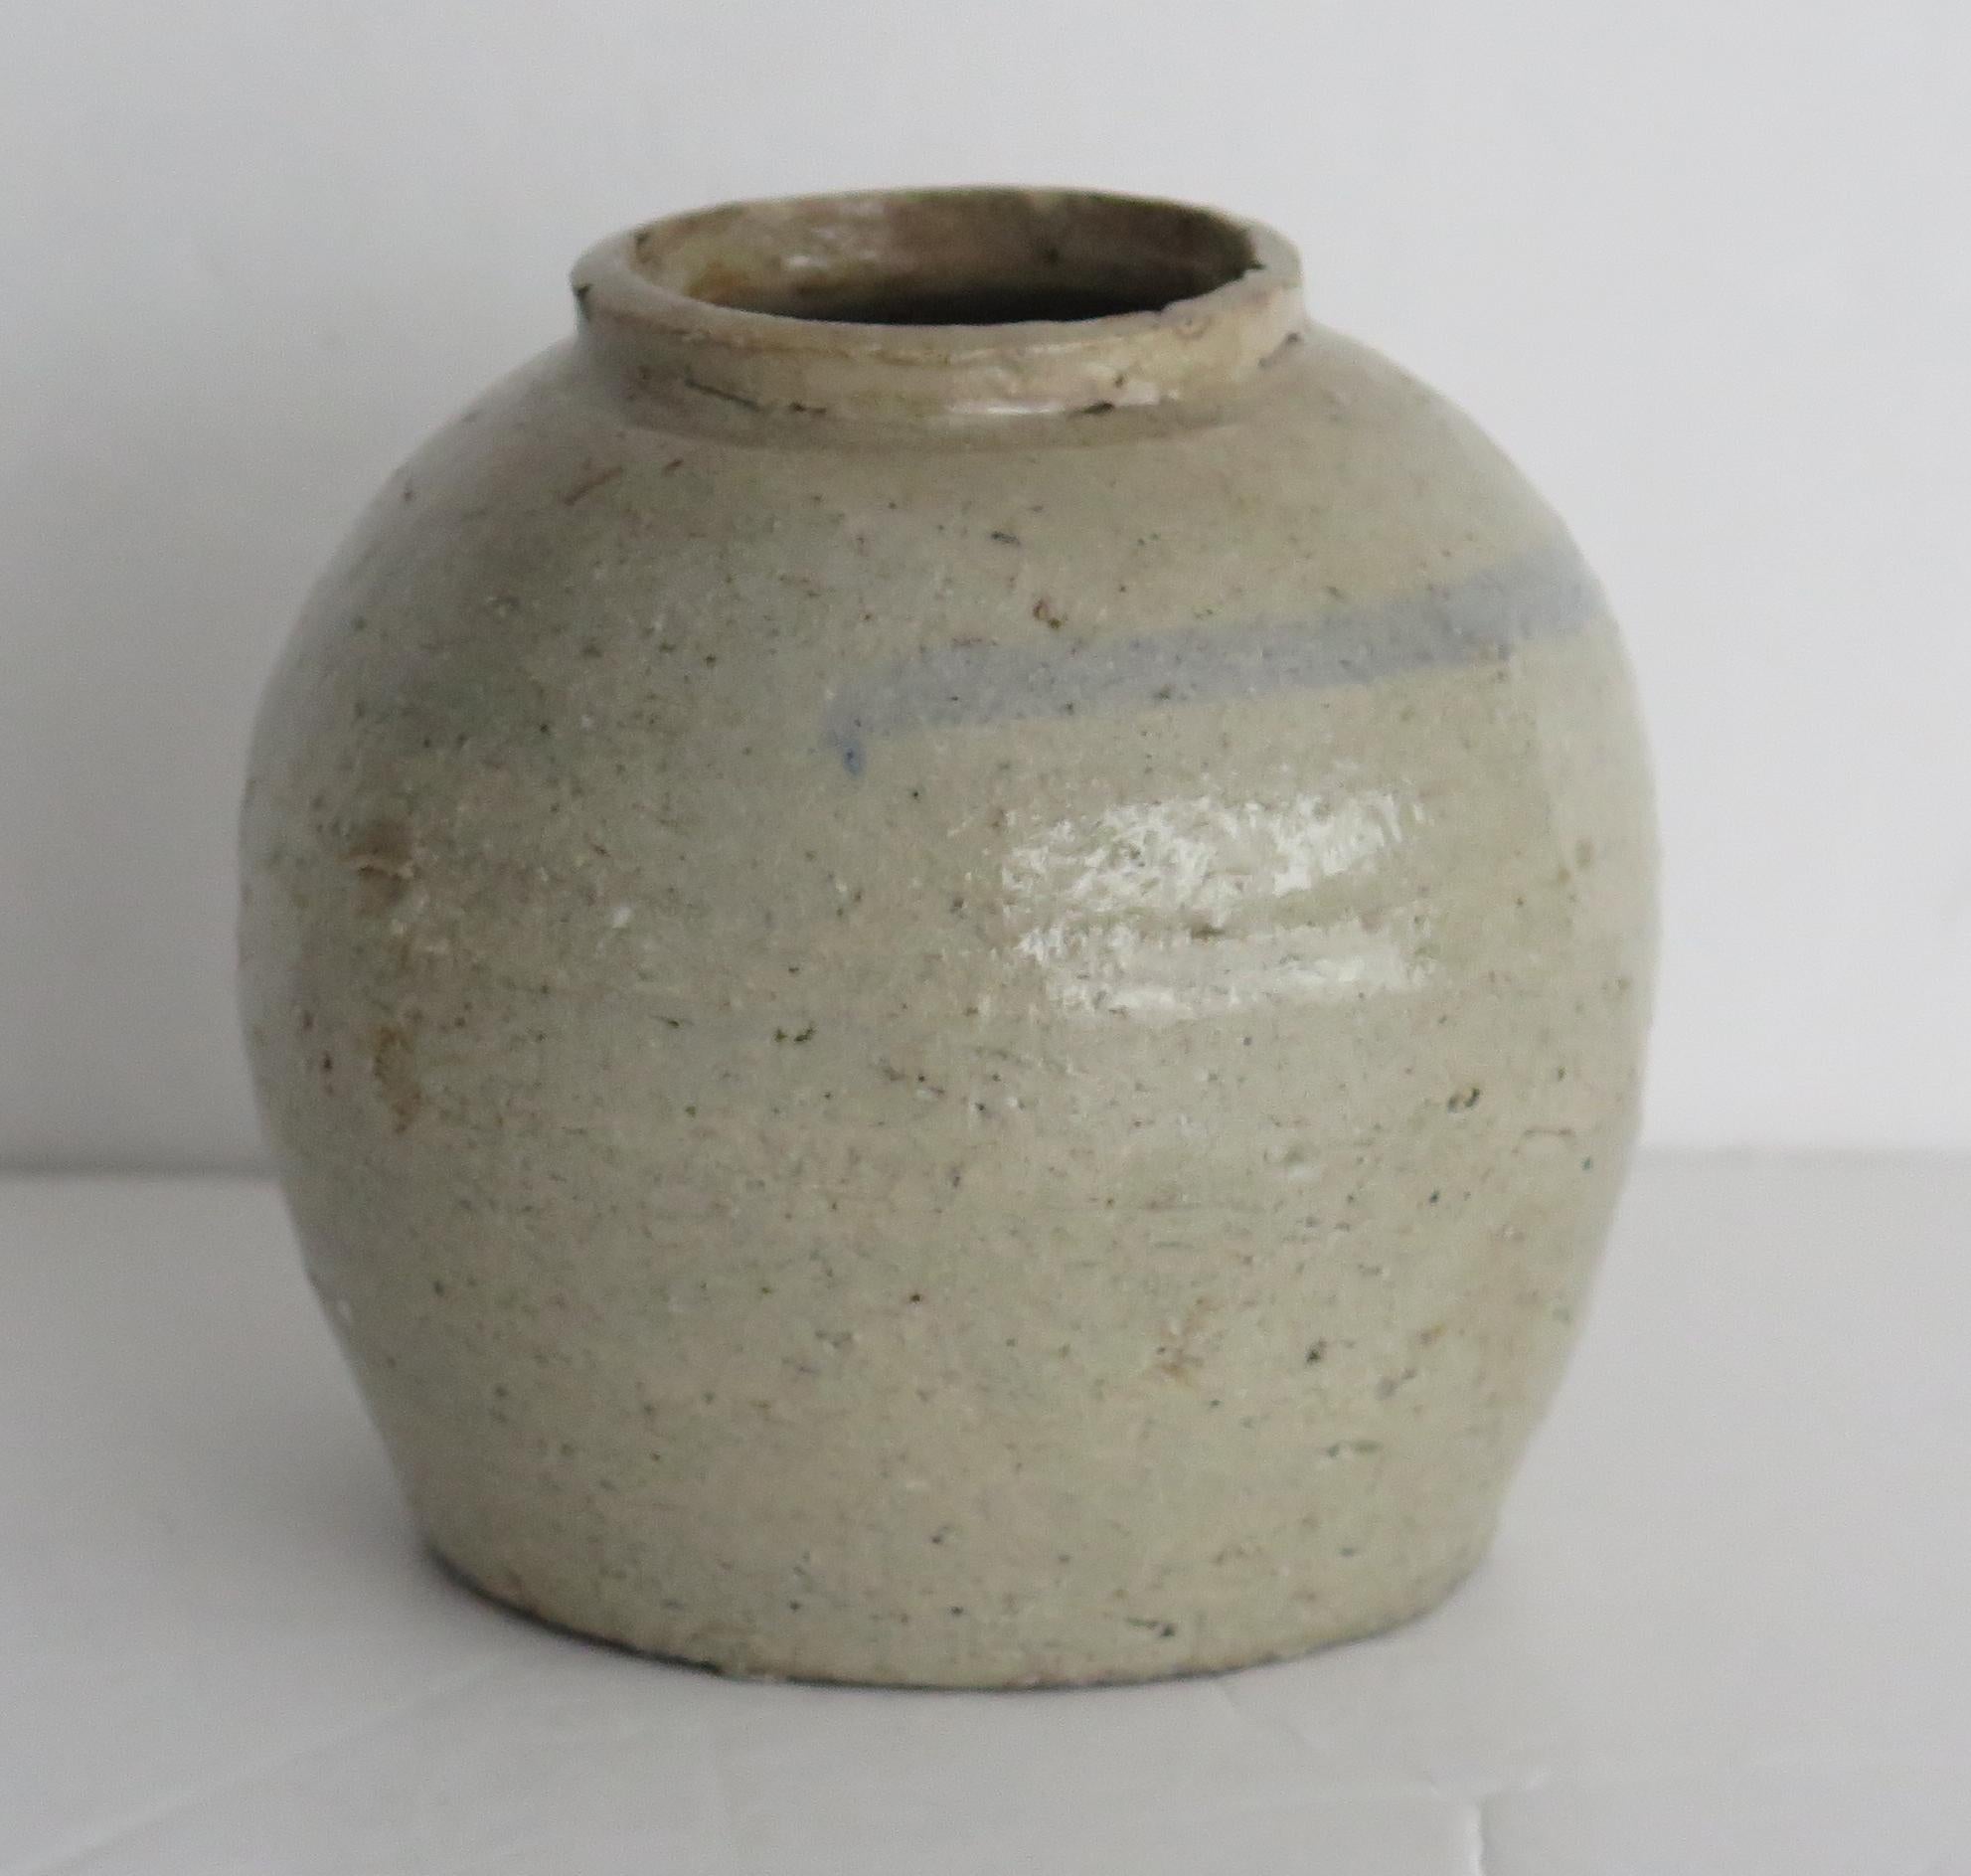 This is a Chinese hand-thrown ceramic provincial jar with a light celadon glaze which we date to the Ming period of the early 17th century or possibly earlier.

The jar is hand potted with a short neck and simply decorated with a ring hand painted